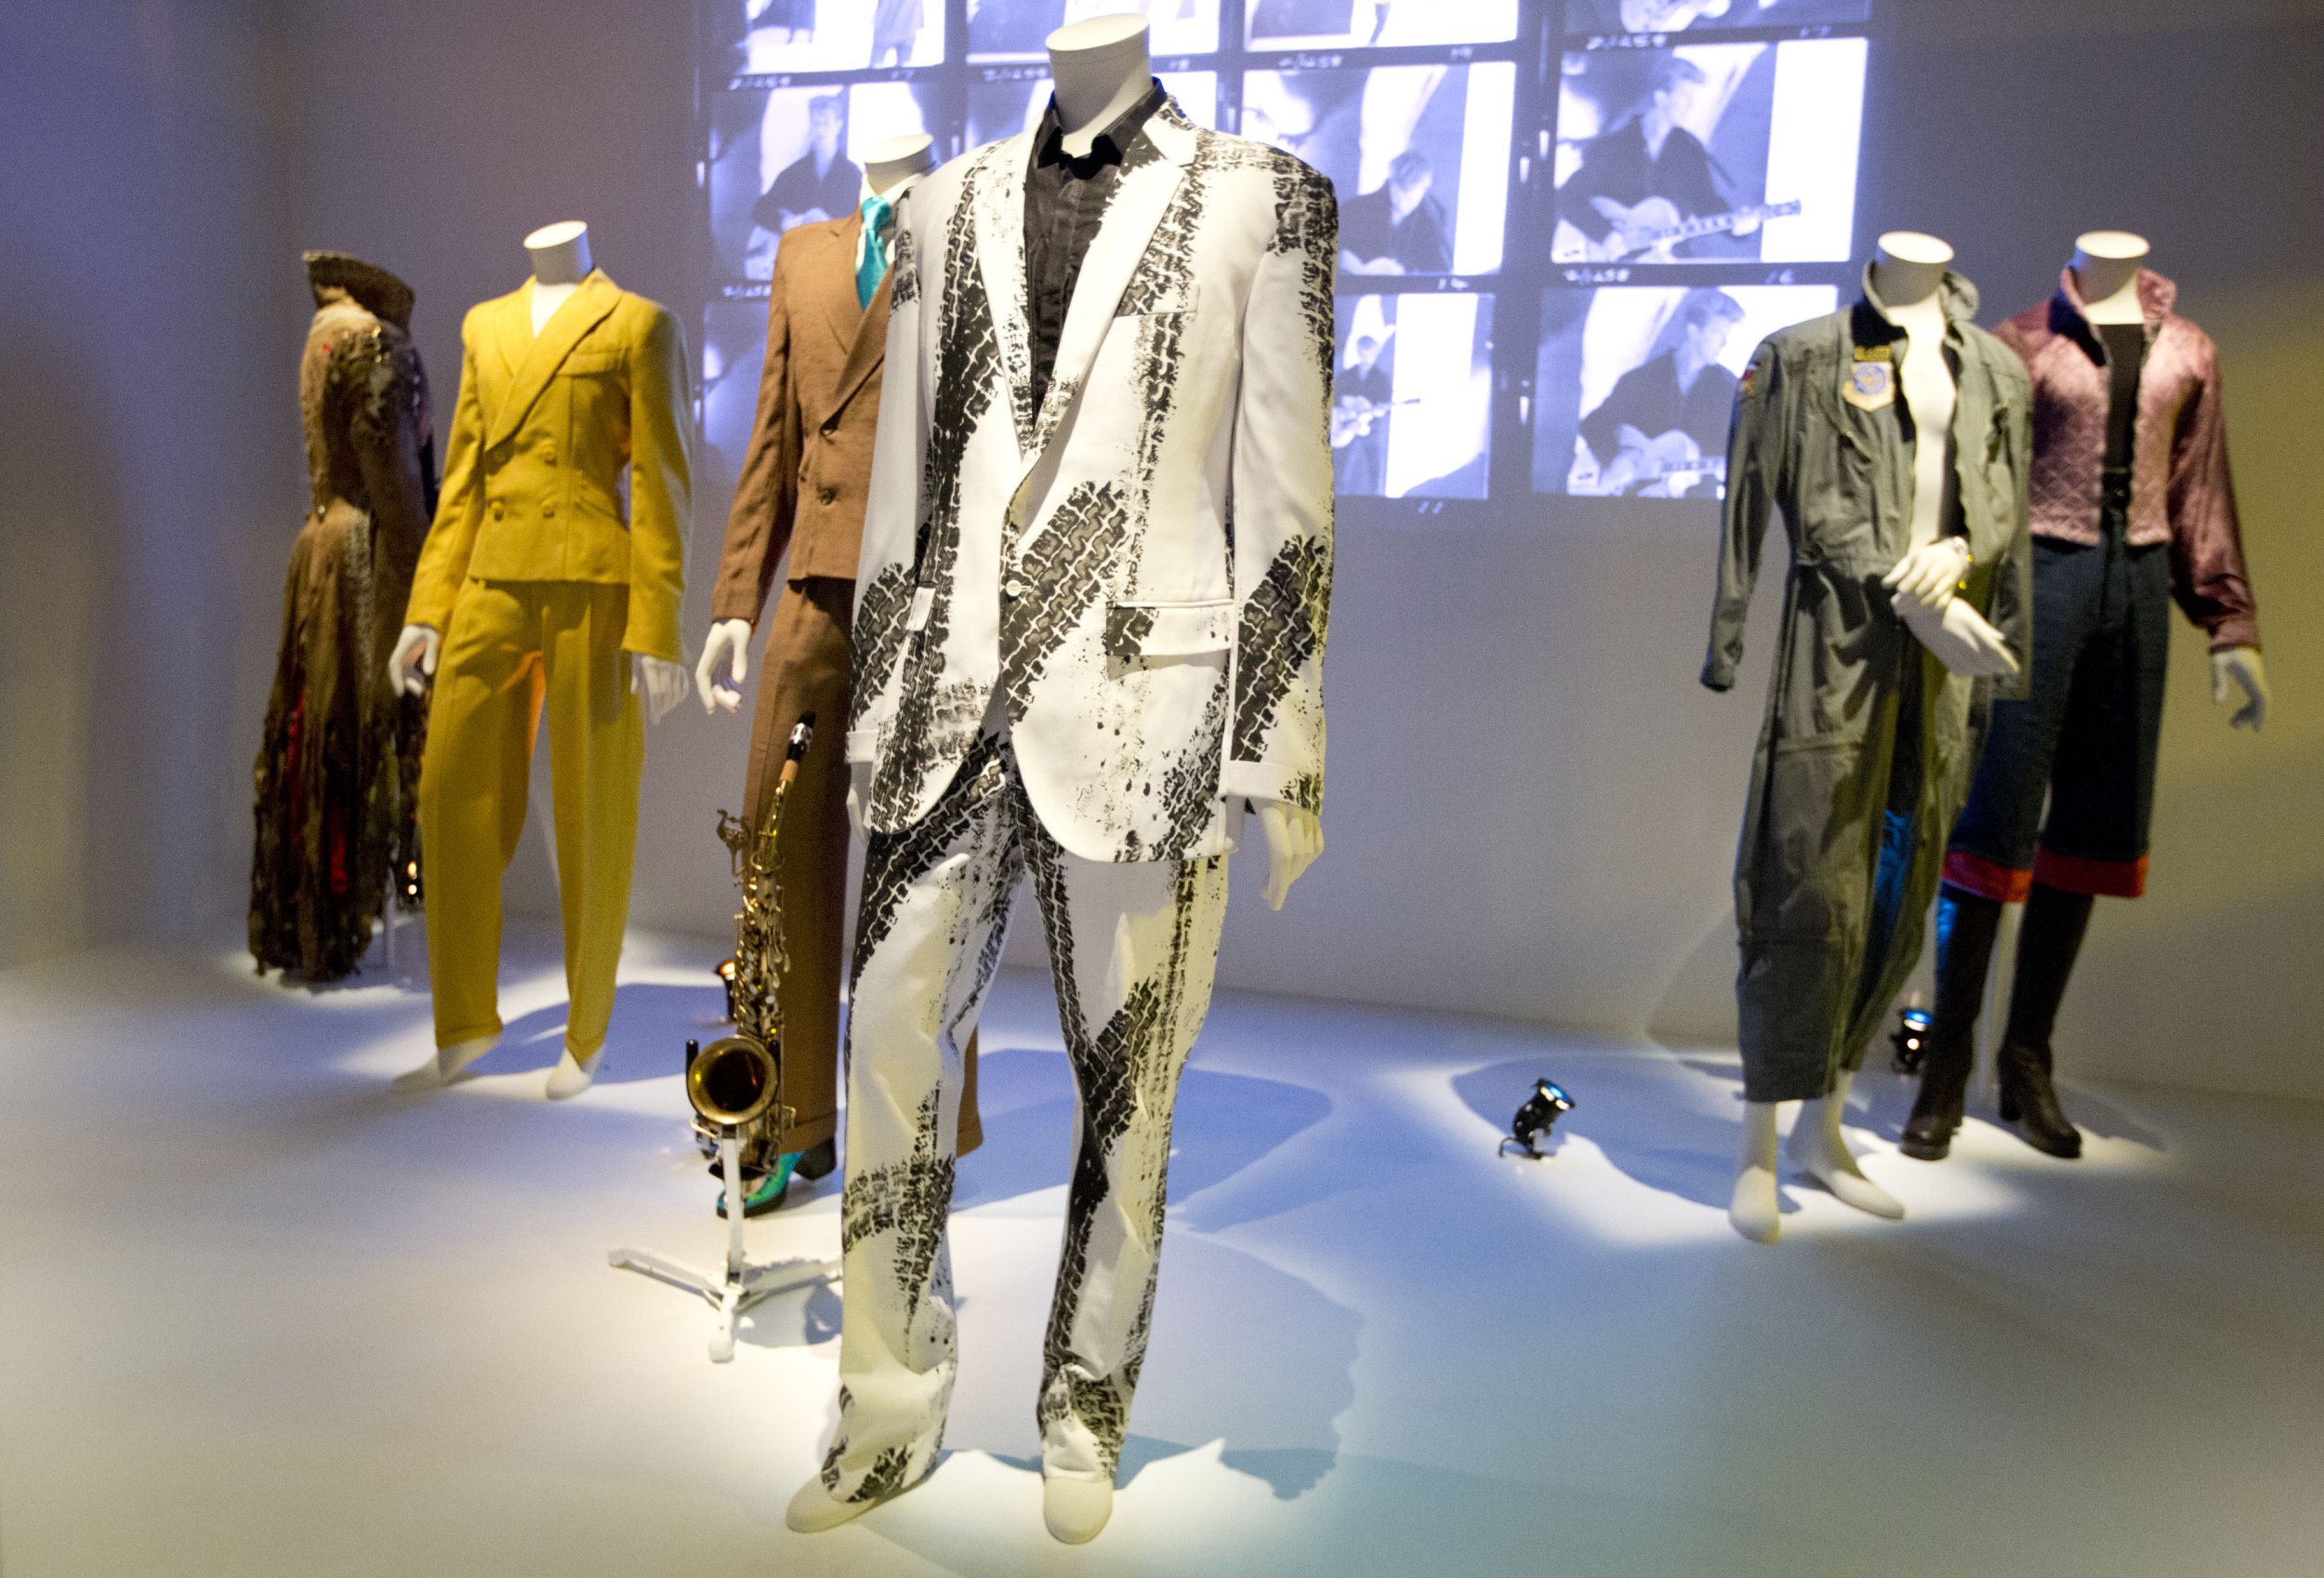 Stage costumes worn by David Bowie.